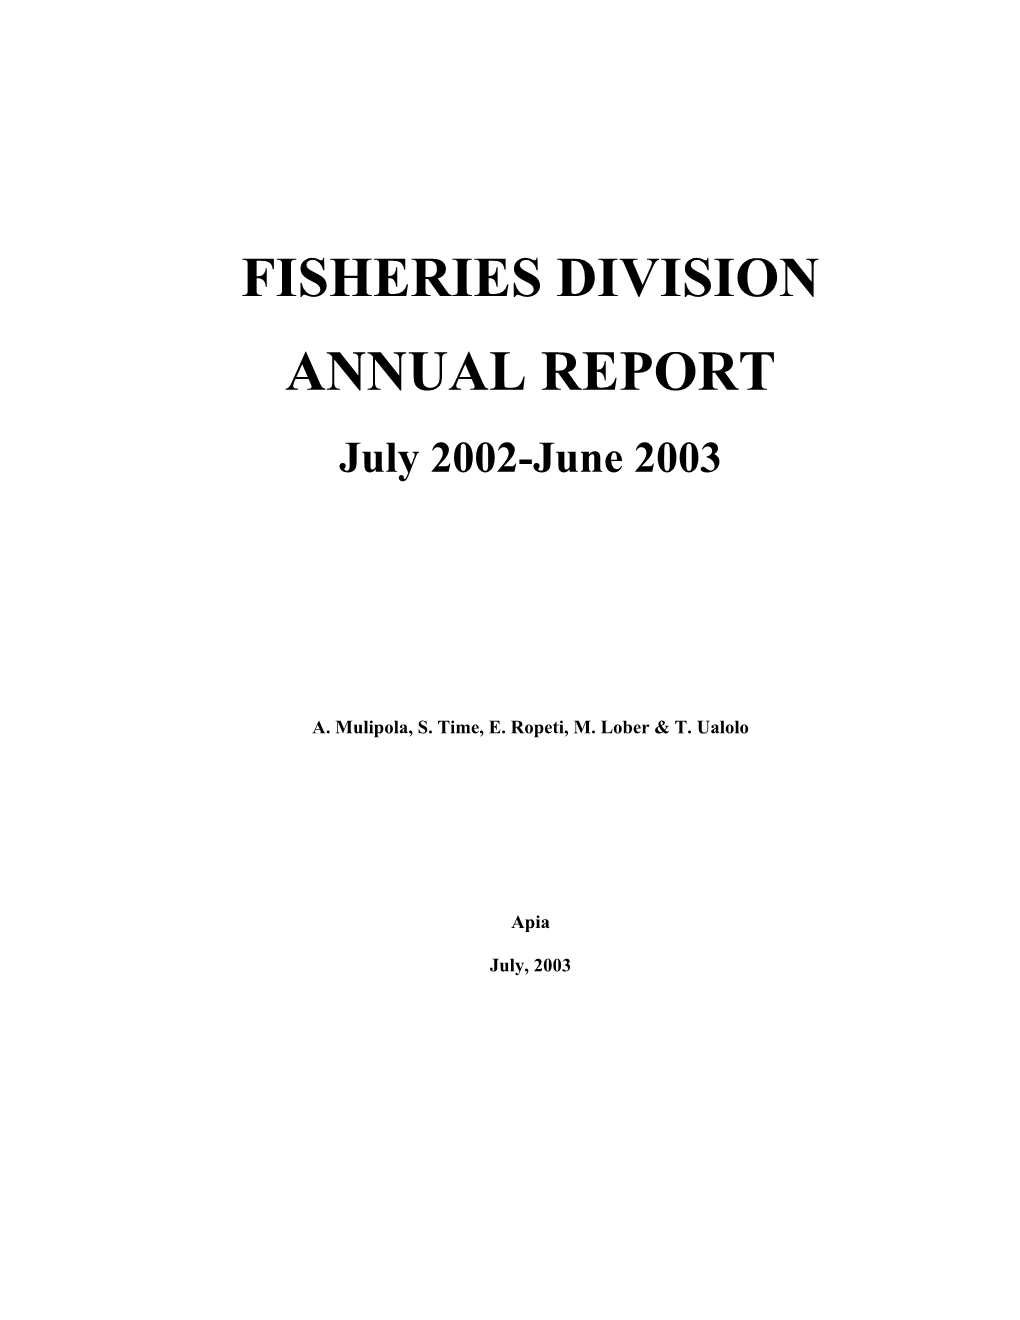 Fisheries Division Annual Report